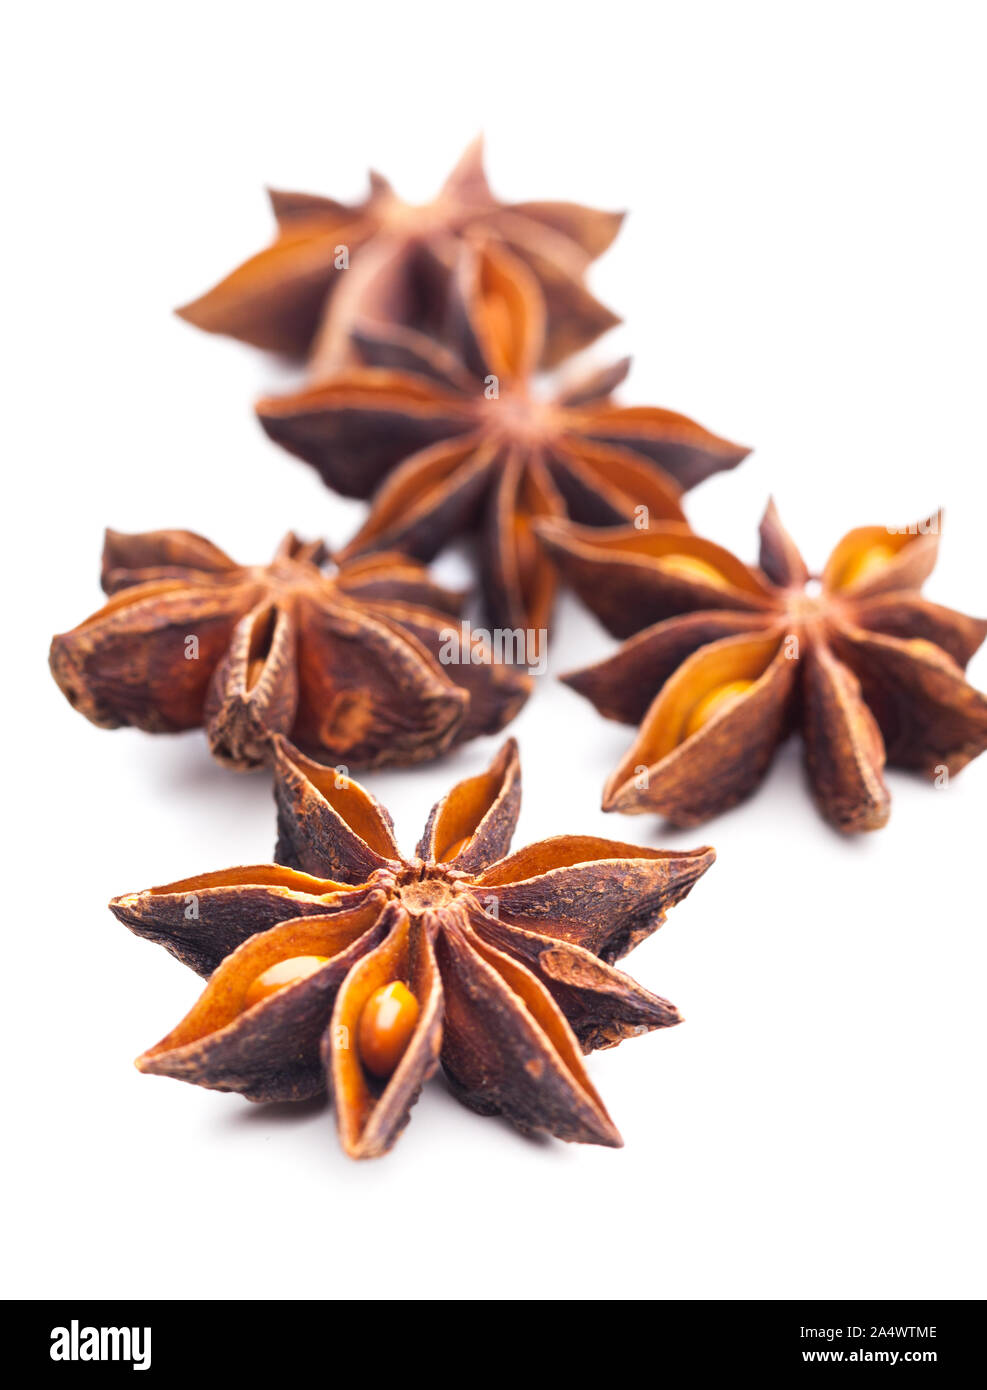 Several star anise isolated on white background Stock Photo